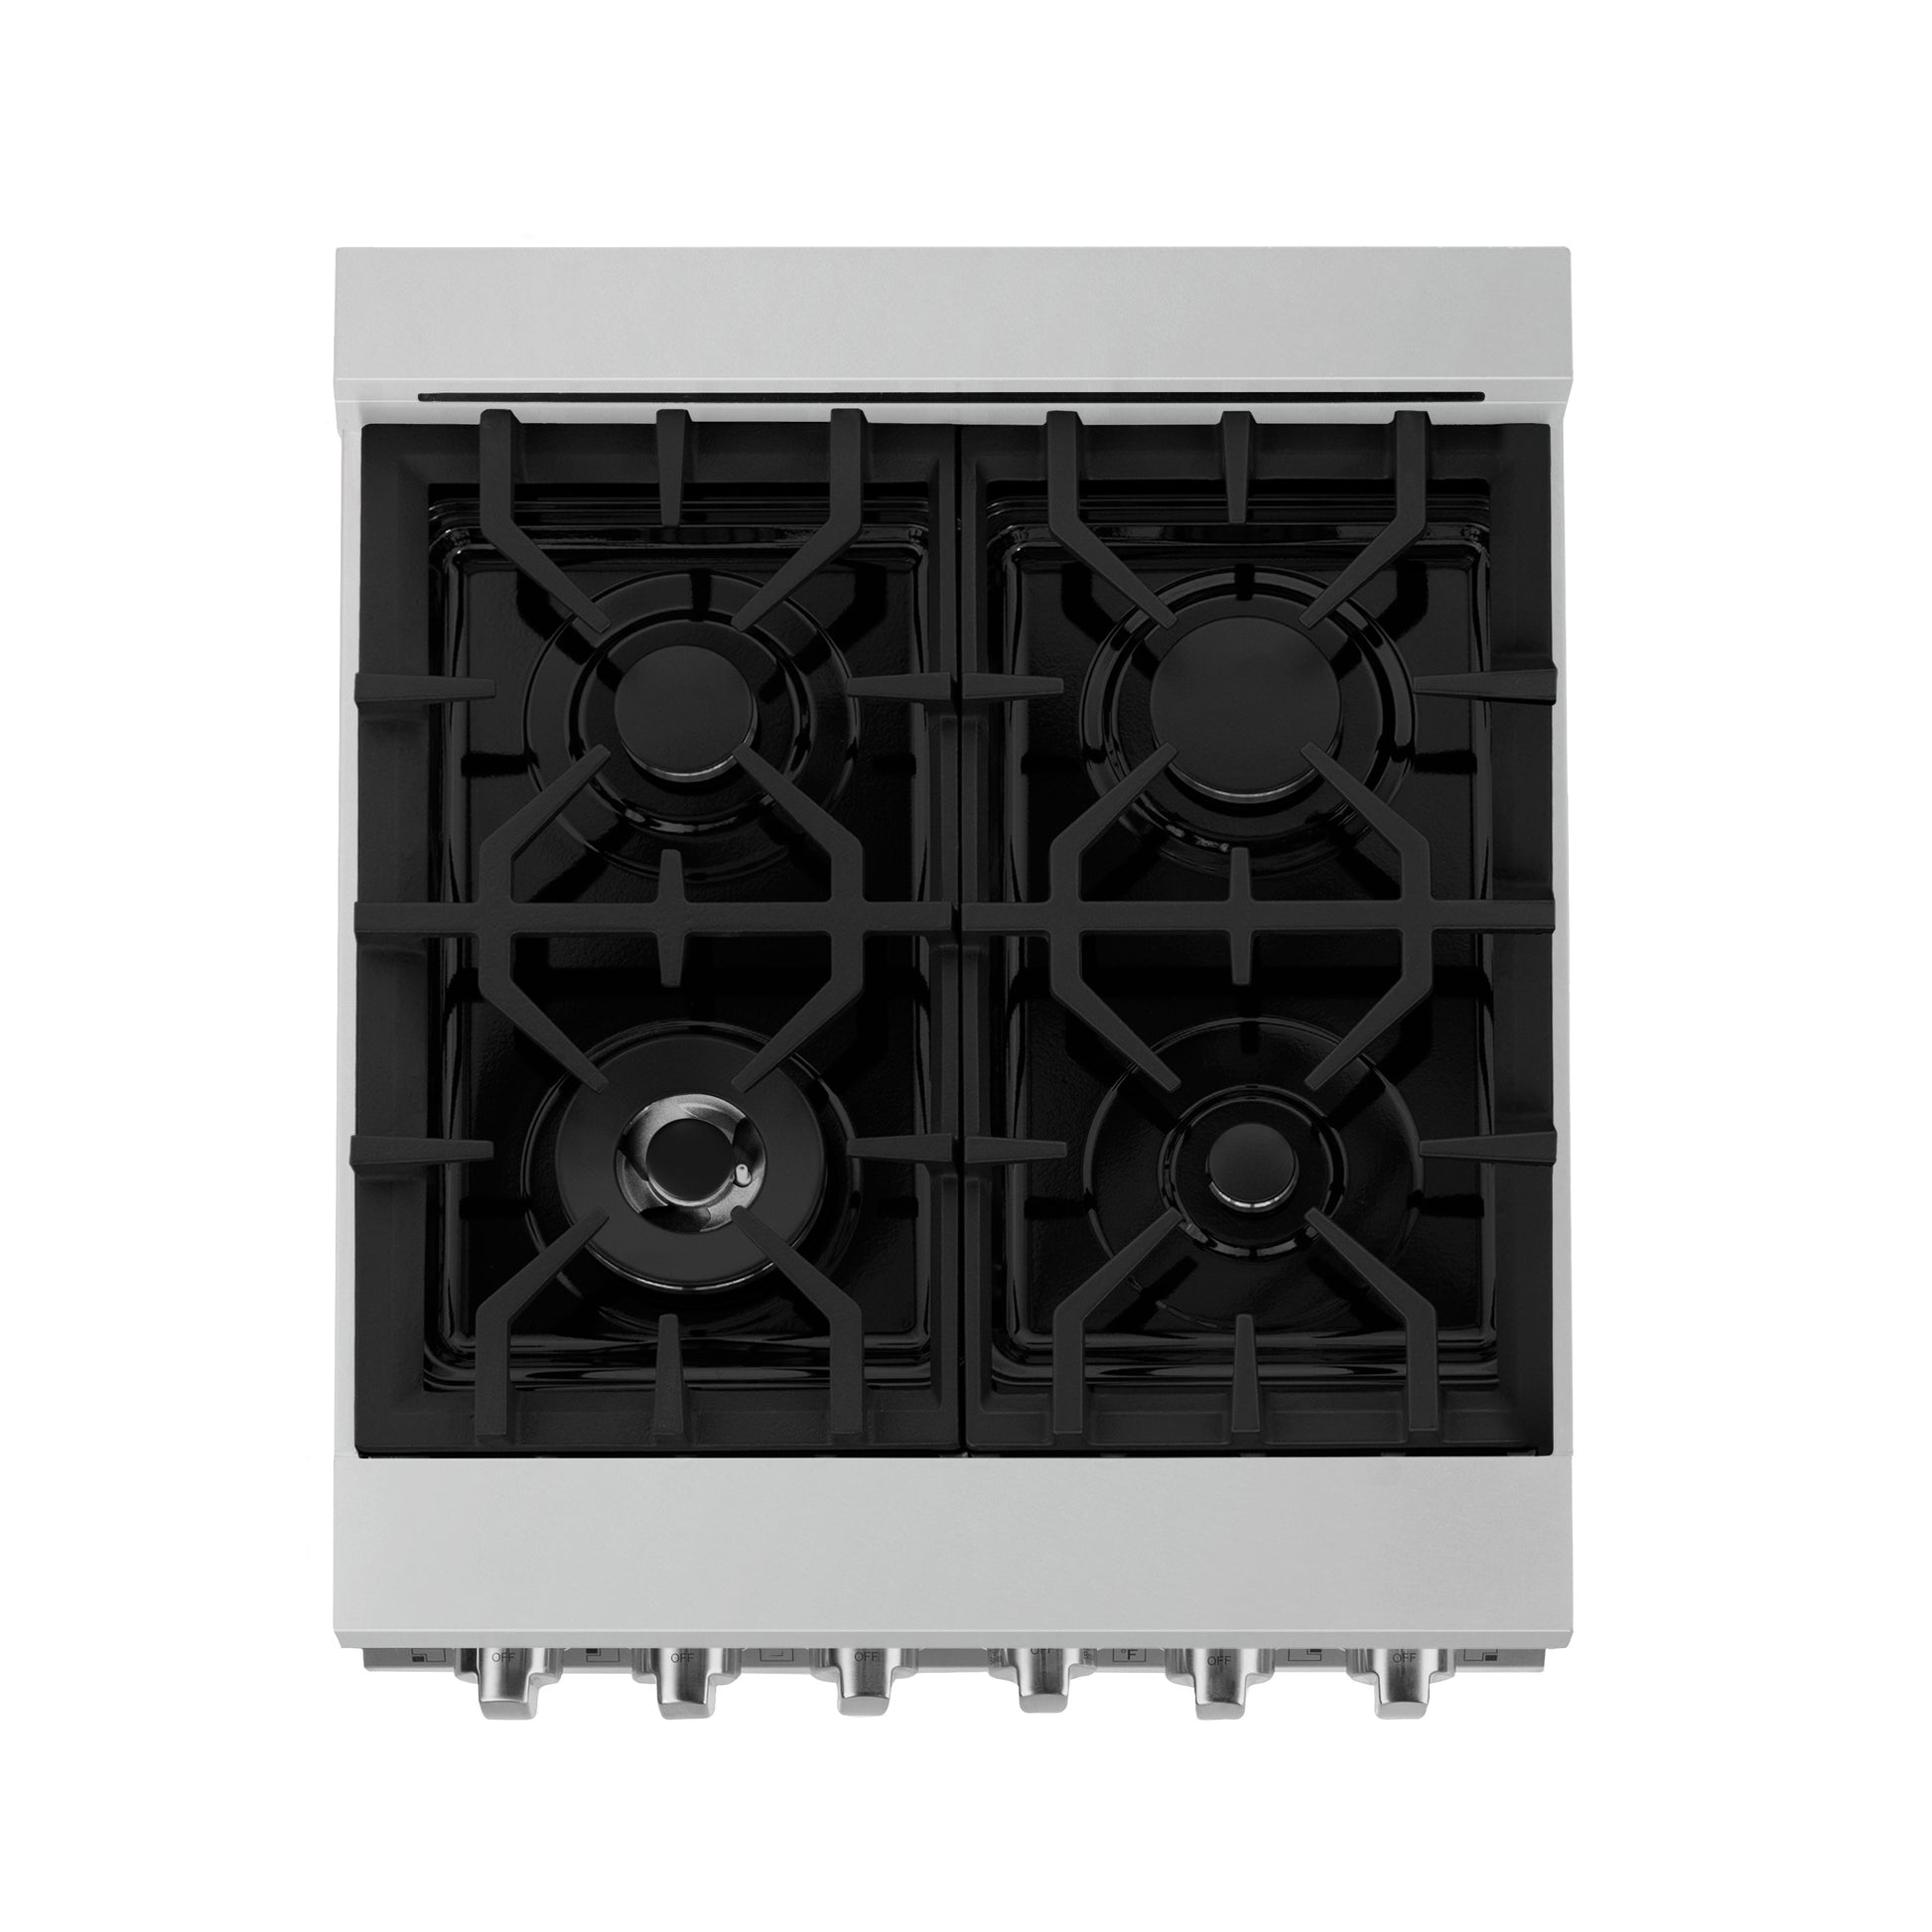 ZLINE 24" Gas Oven and Cooktop Range with Griddle - Stainless Steel